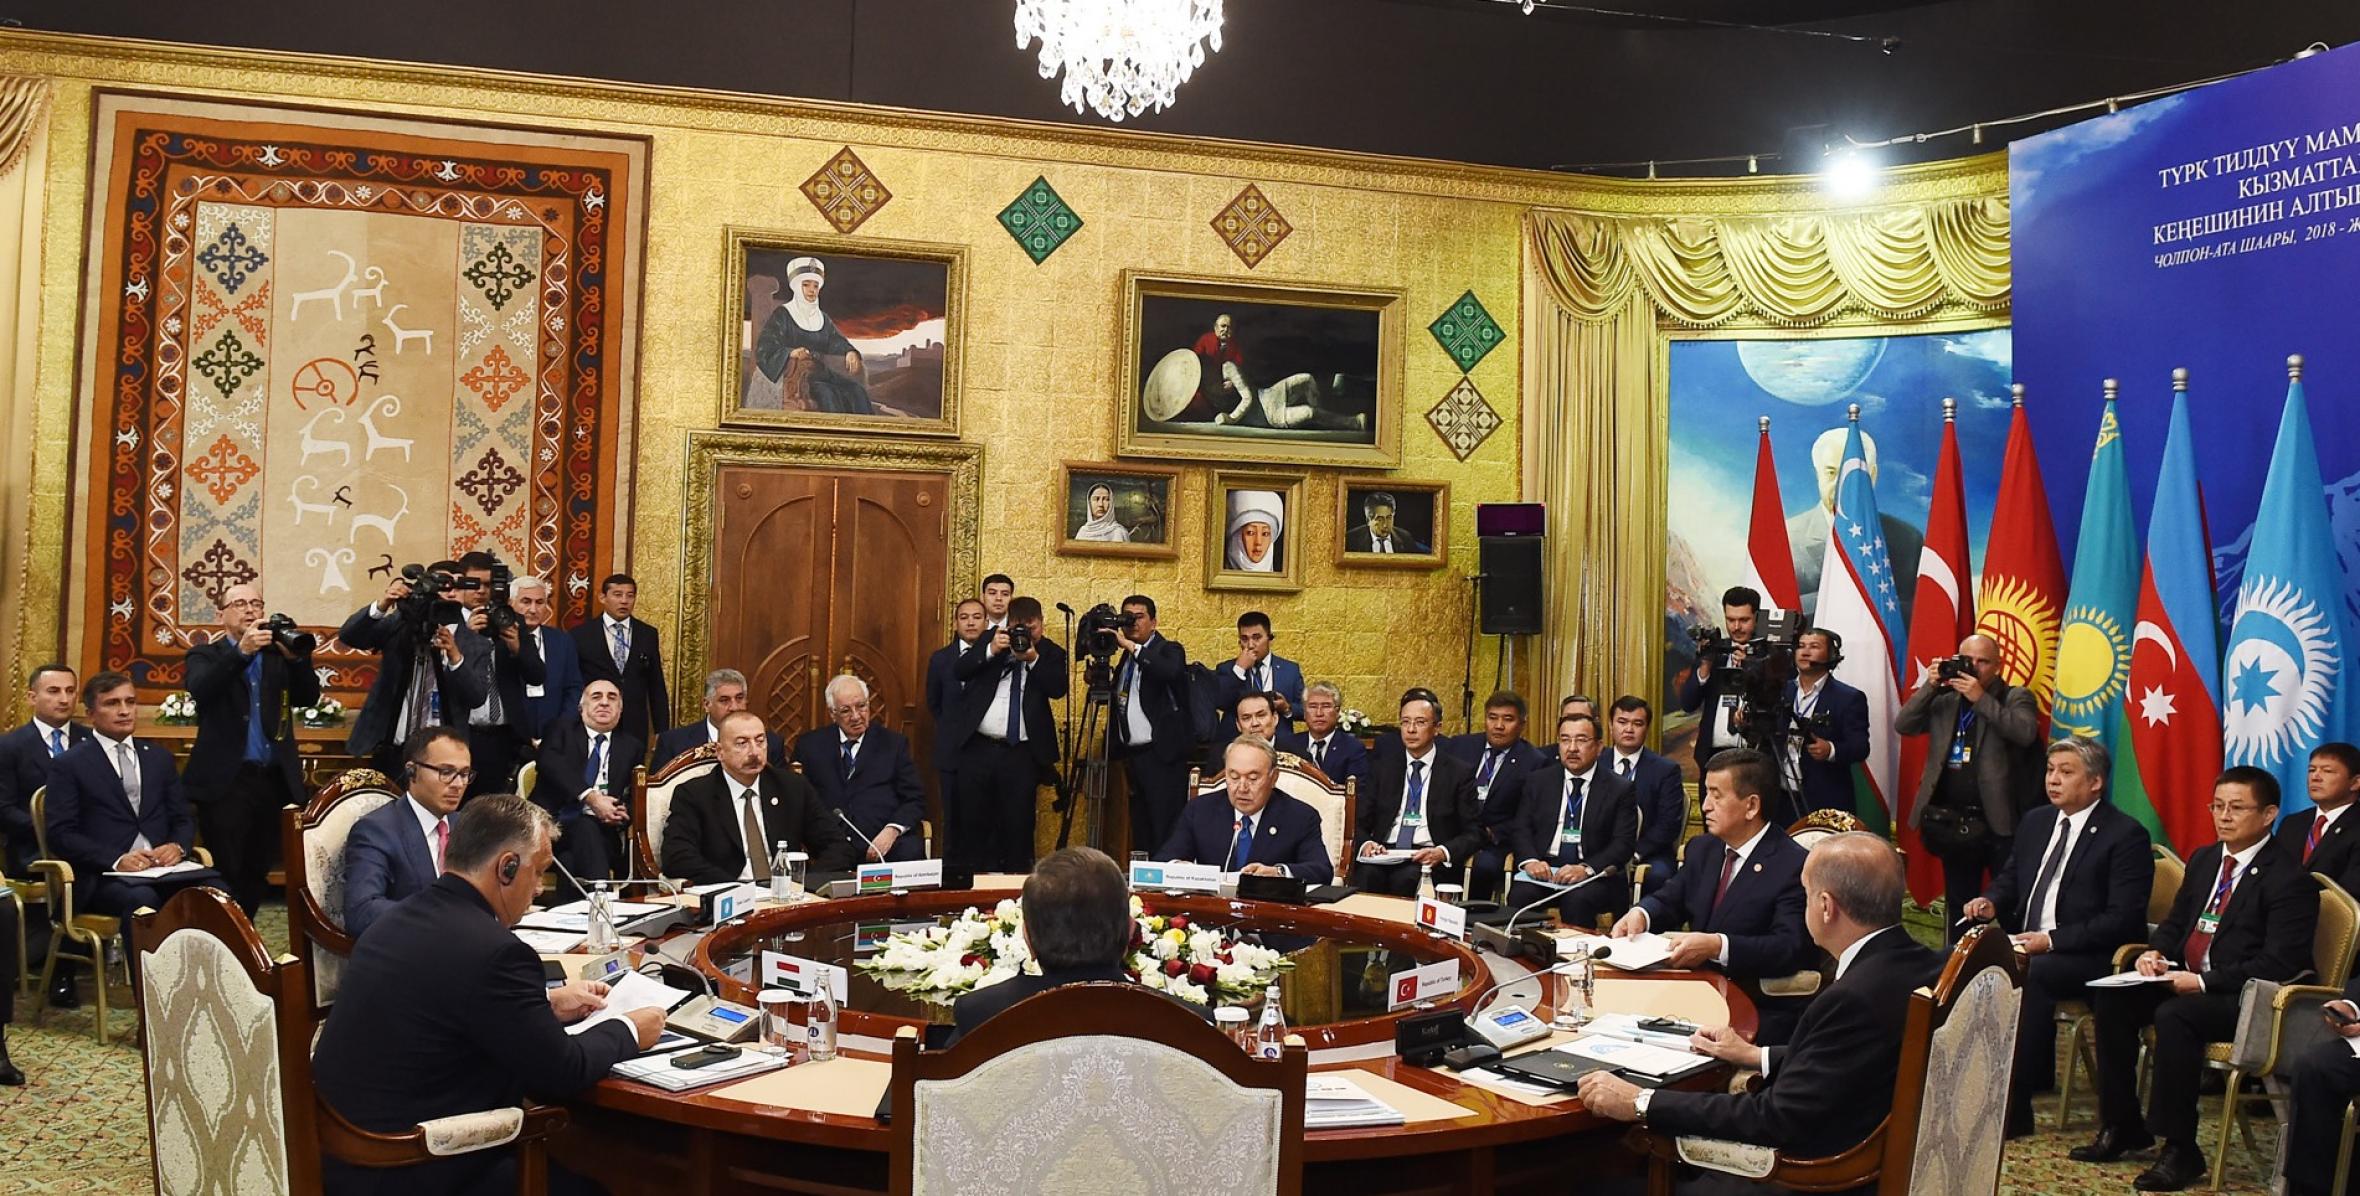 6th Summit of Cooperation Council of Turkic Speaking States kicks off in Cholpon-Ata